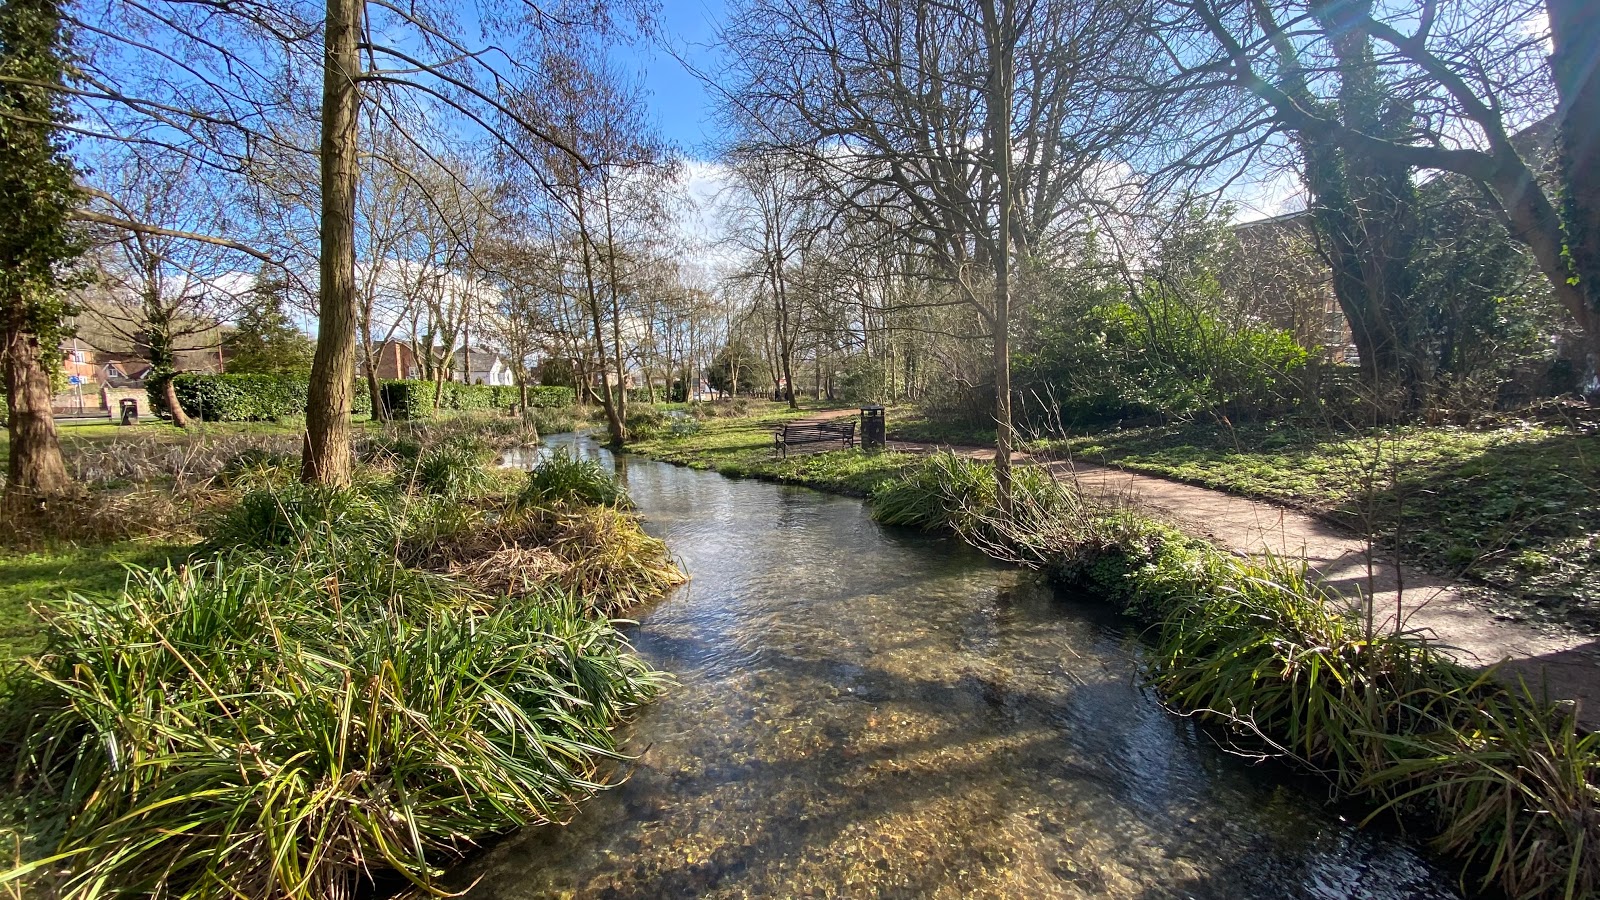 https://whatremovals.co.uk/wp-content/uploads/2022/02/Meades Water Gardens-300x169.jpeg